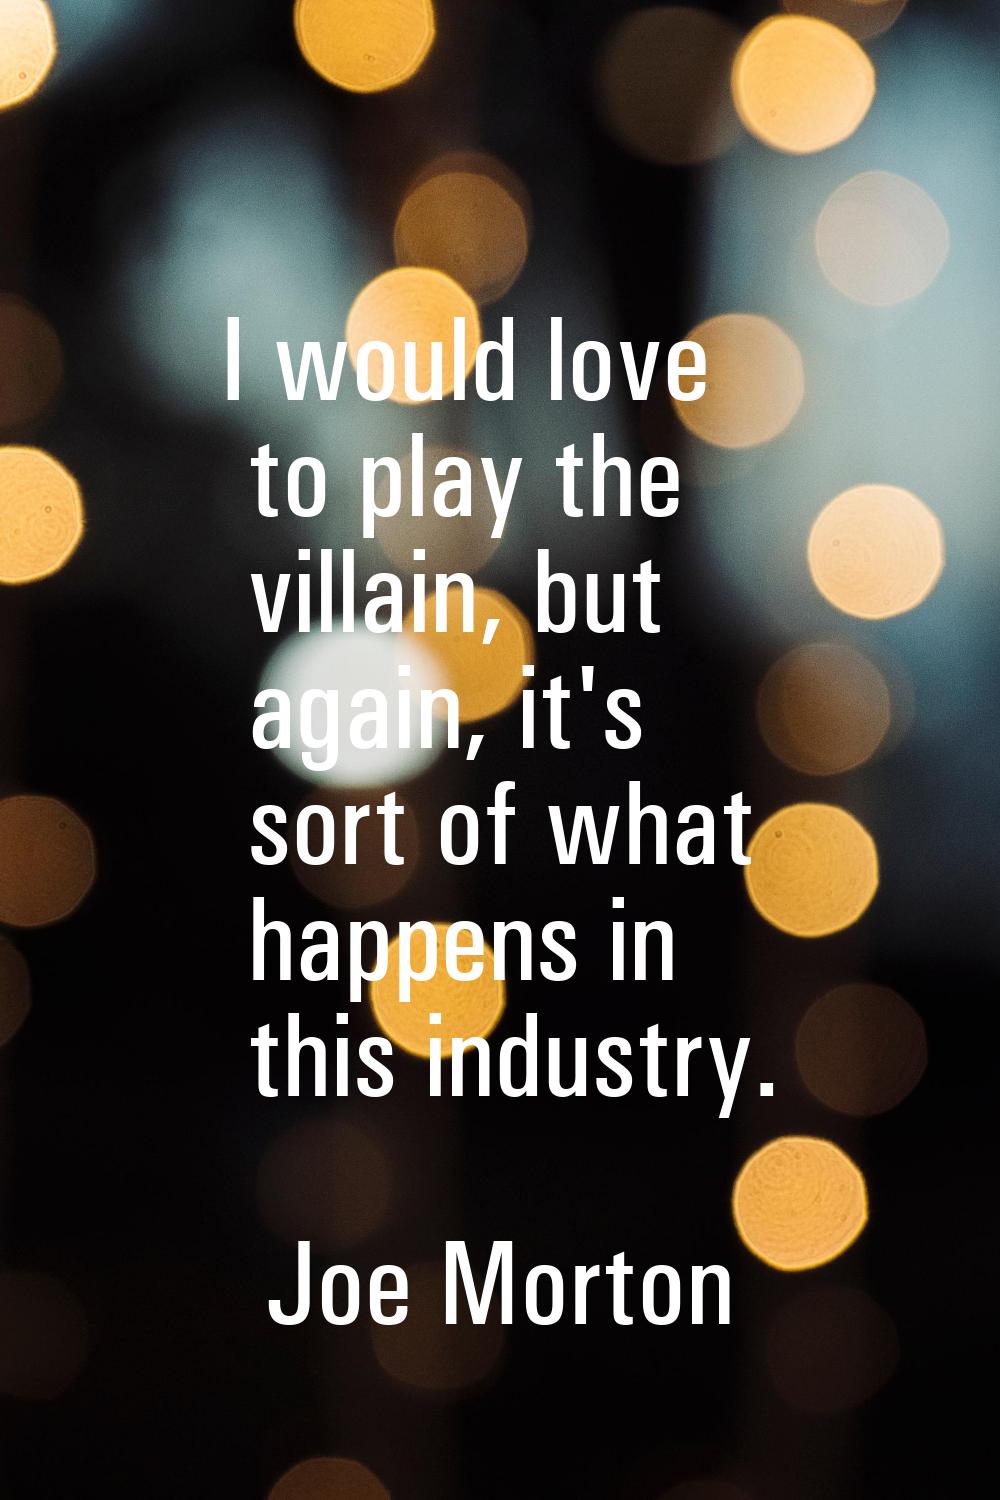 I would love to play the villain, but again, it's sort of what happens in this industry.